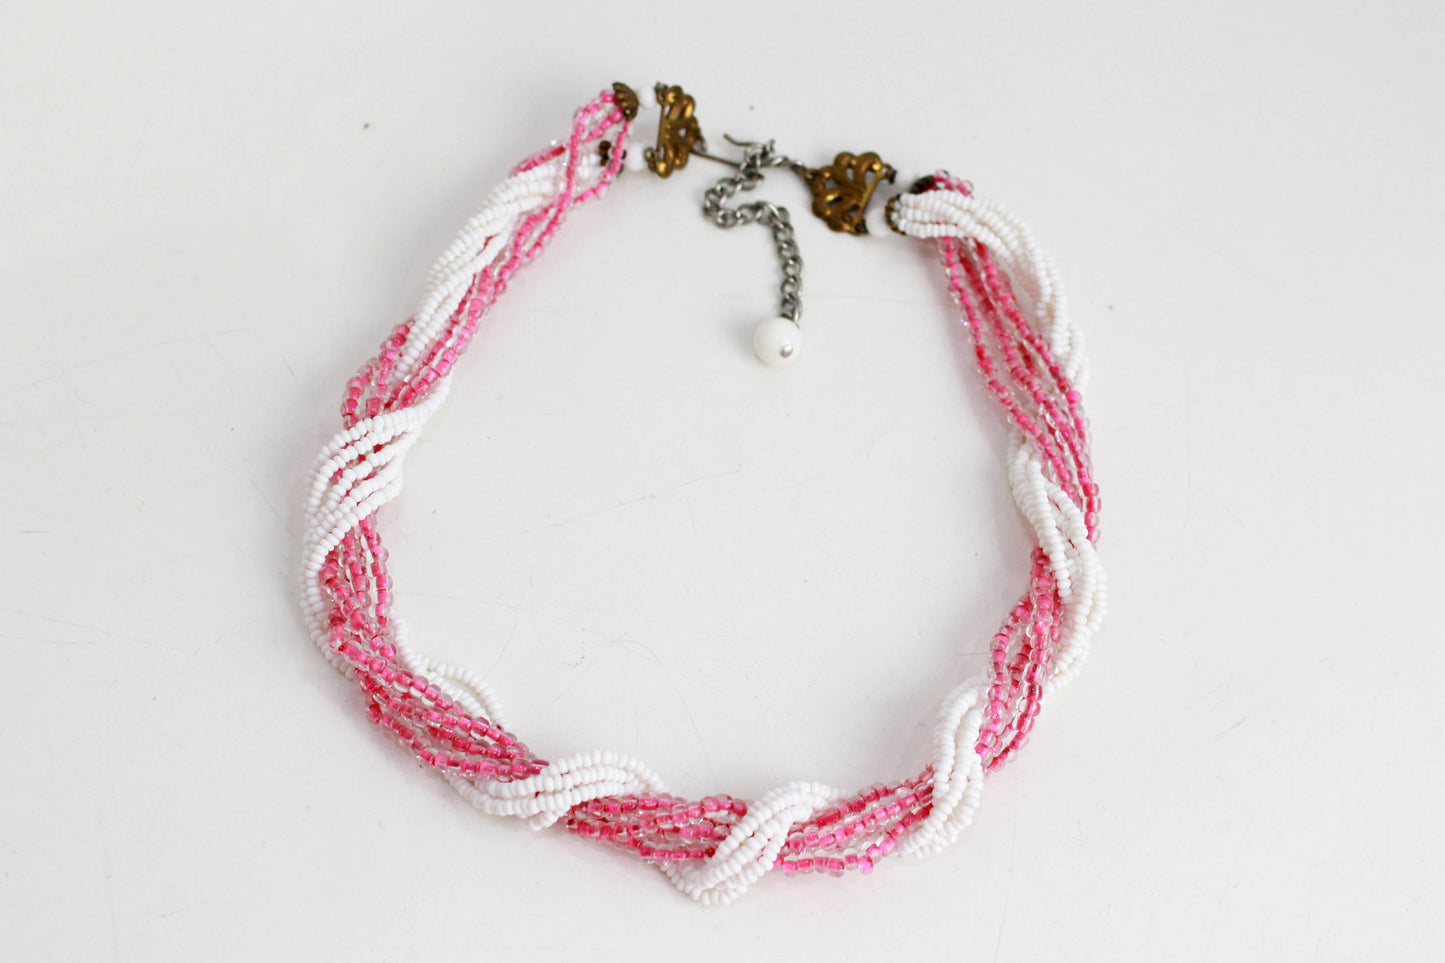 1940s/50s Glass Torsade, Pink and White Beads Necklace